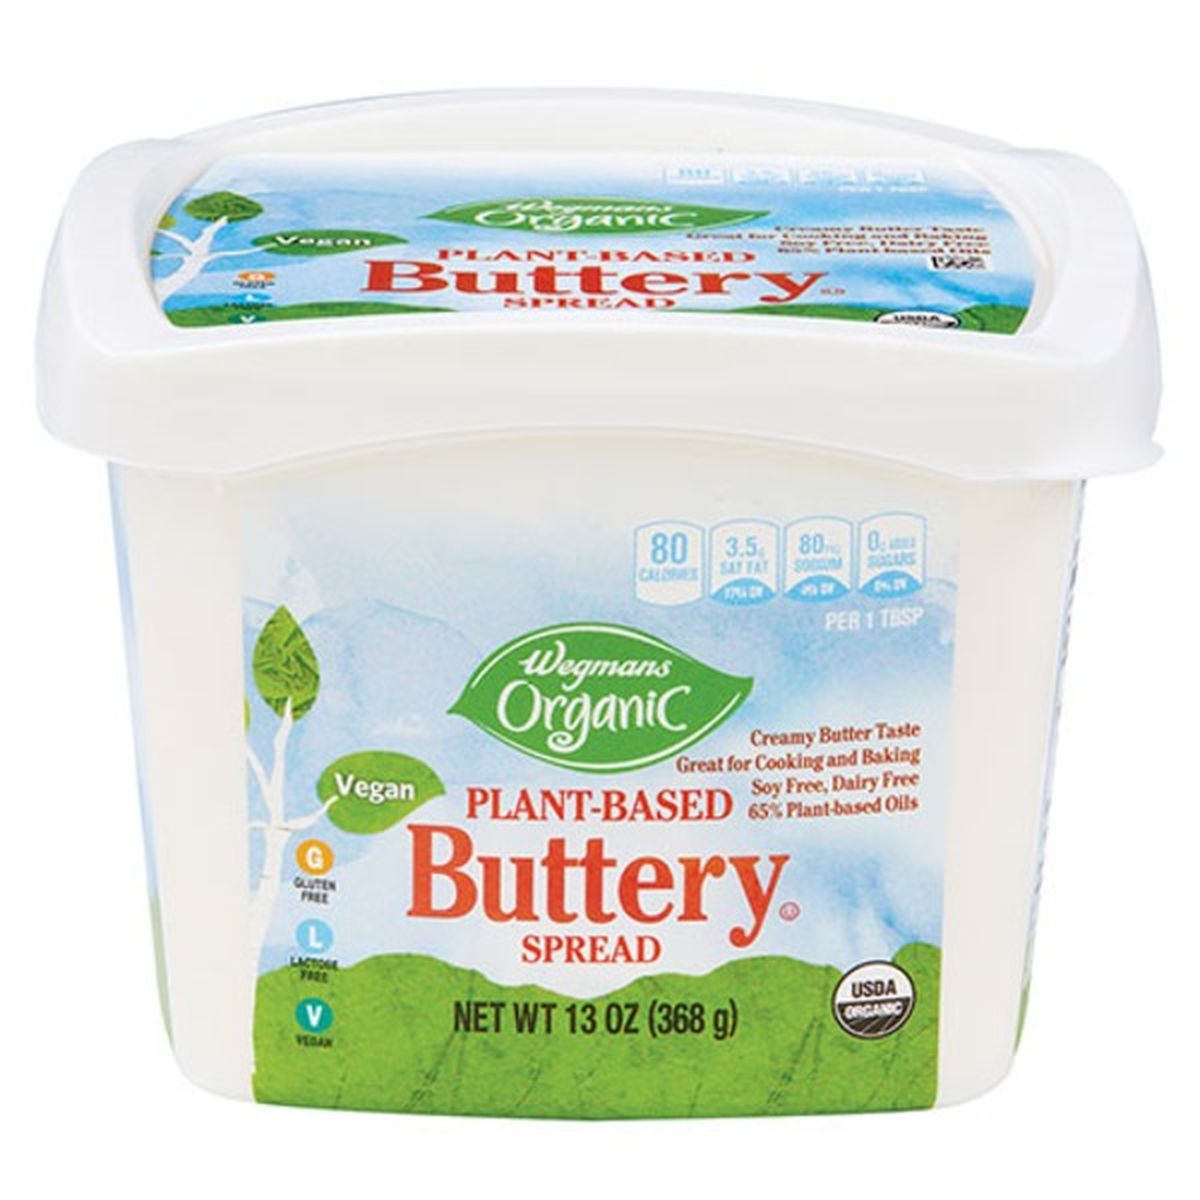 Calories in Wegmans Organic Plant-Based Buttery Spread